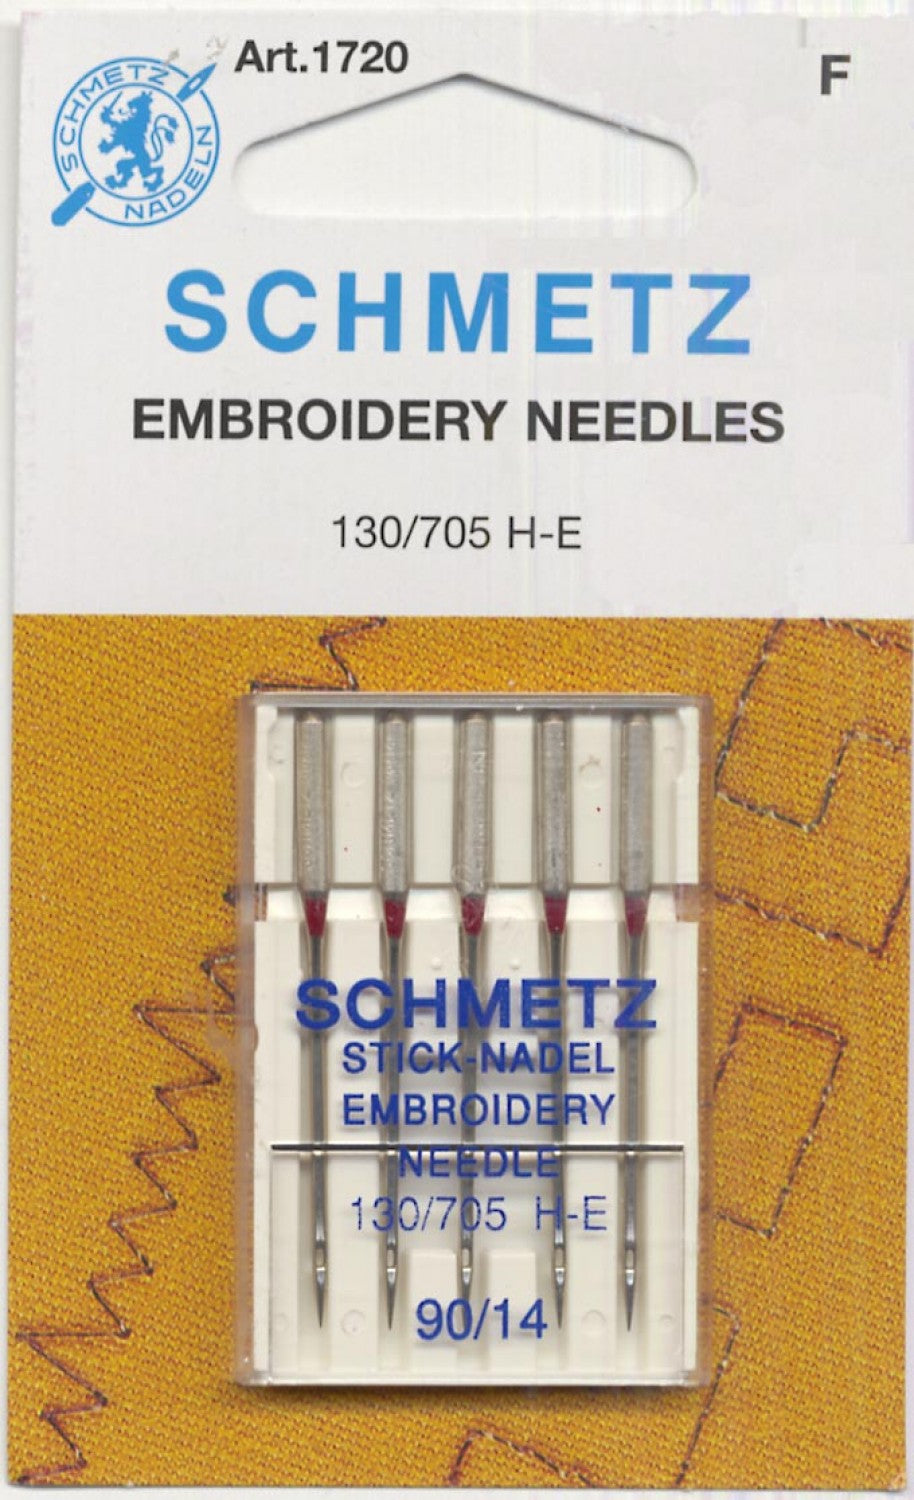 Schmetz Embroidery Needle - 90/14 - 1 Package of 5 Needles